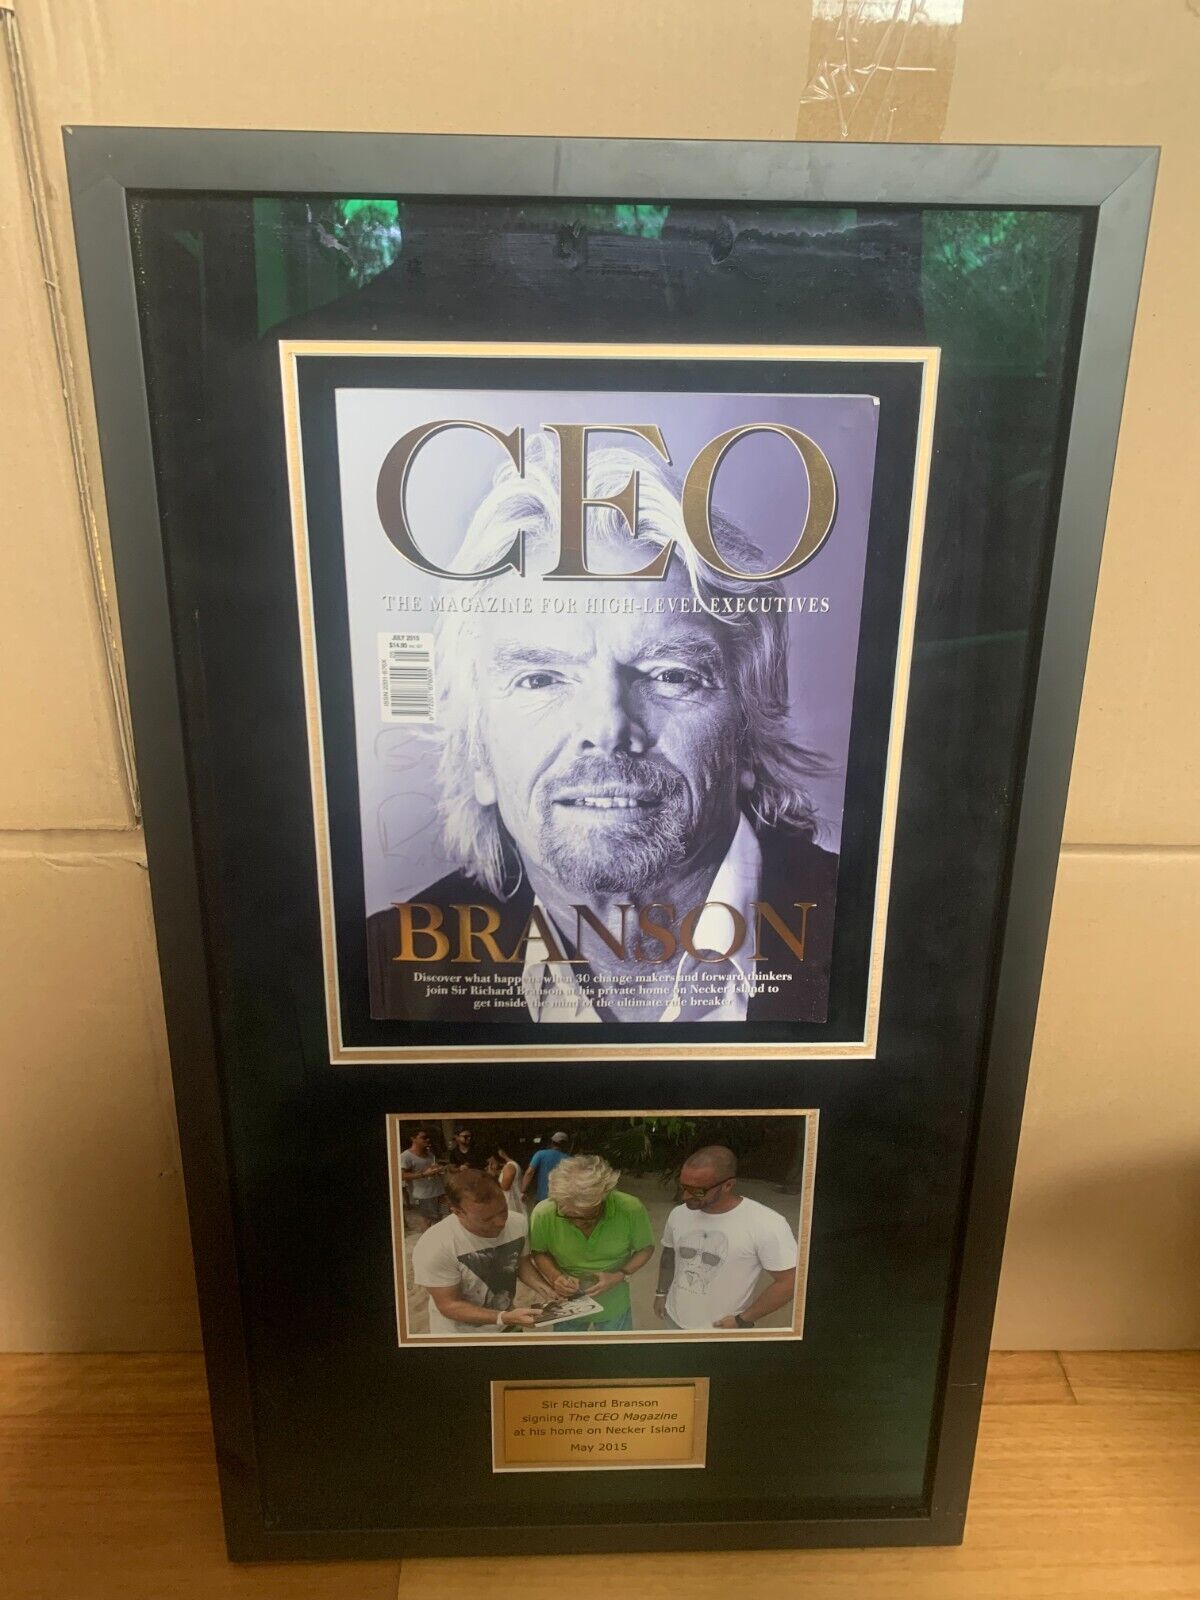 Richard Branson Signed copy of CEO Magazine 2015 with photo and plaque.